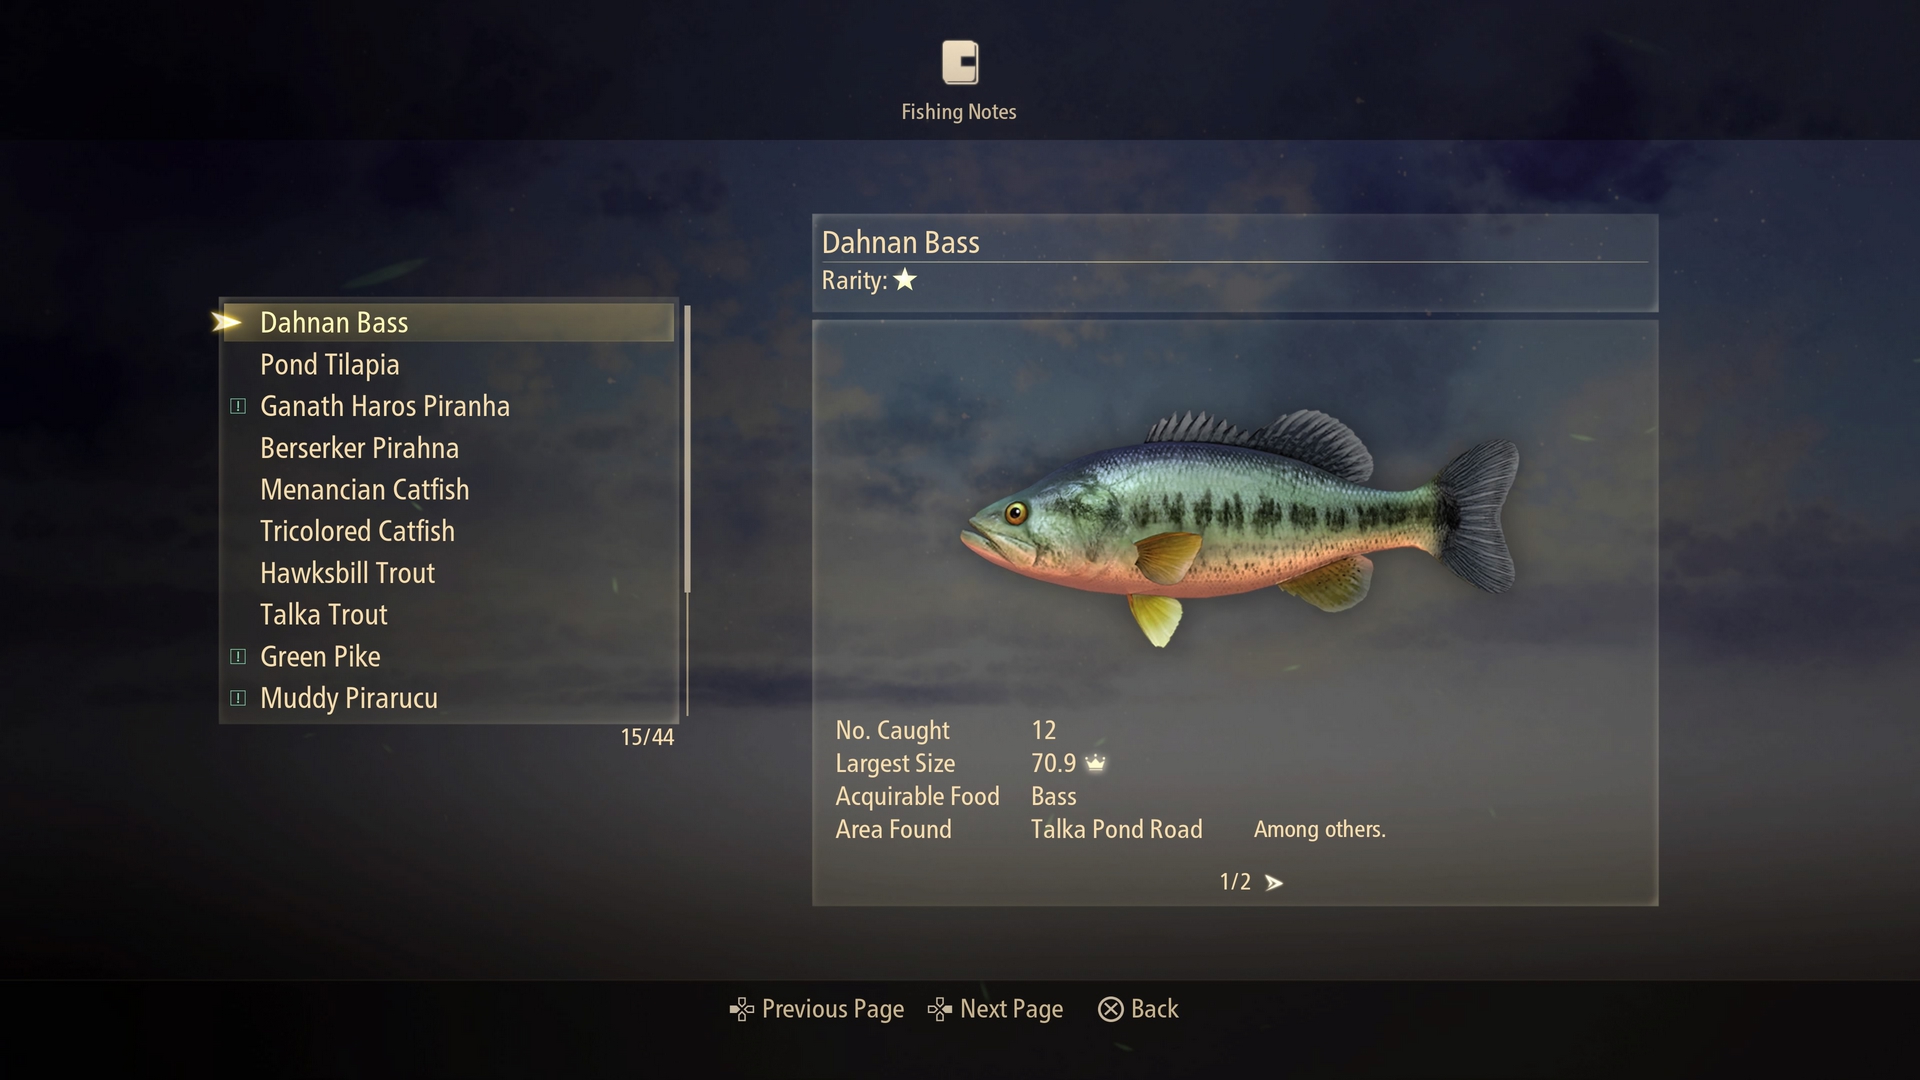 Fishing All Over Dahna: Guide To Fishing For Tales Of Arise